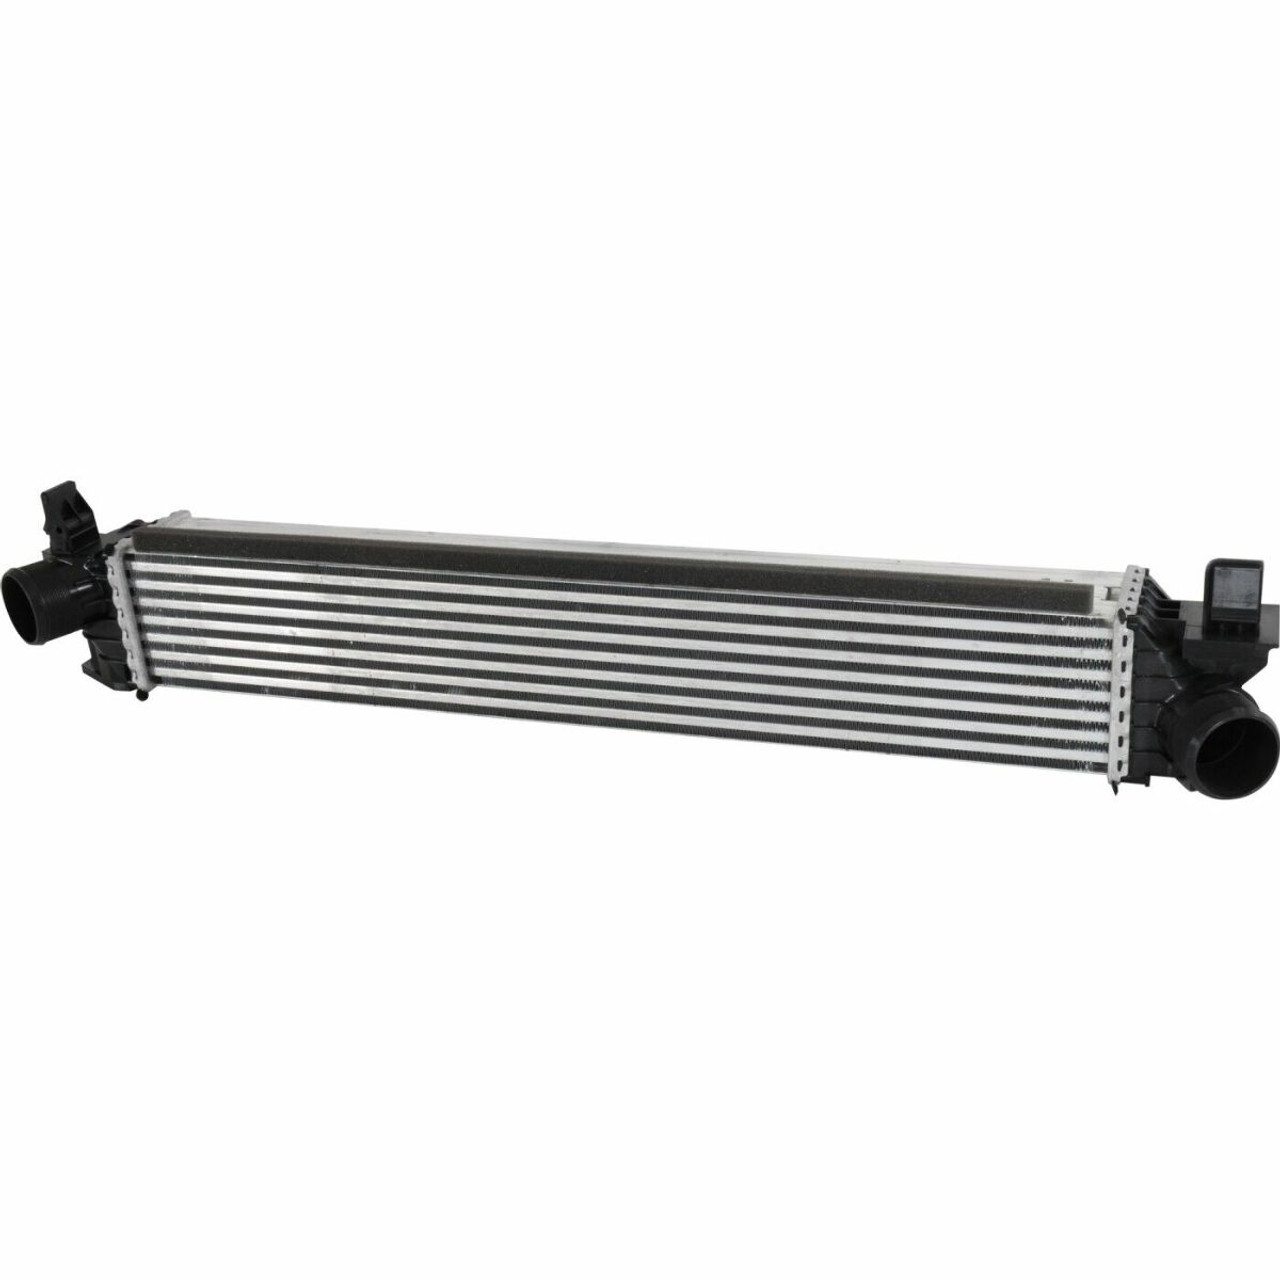 Fits 14-17 PROMASTER 1500/2500/3500 INTERCOOLER, Assembly 3.0L Diesel Eng w/ A/C